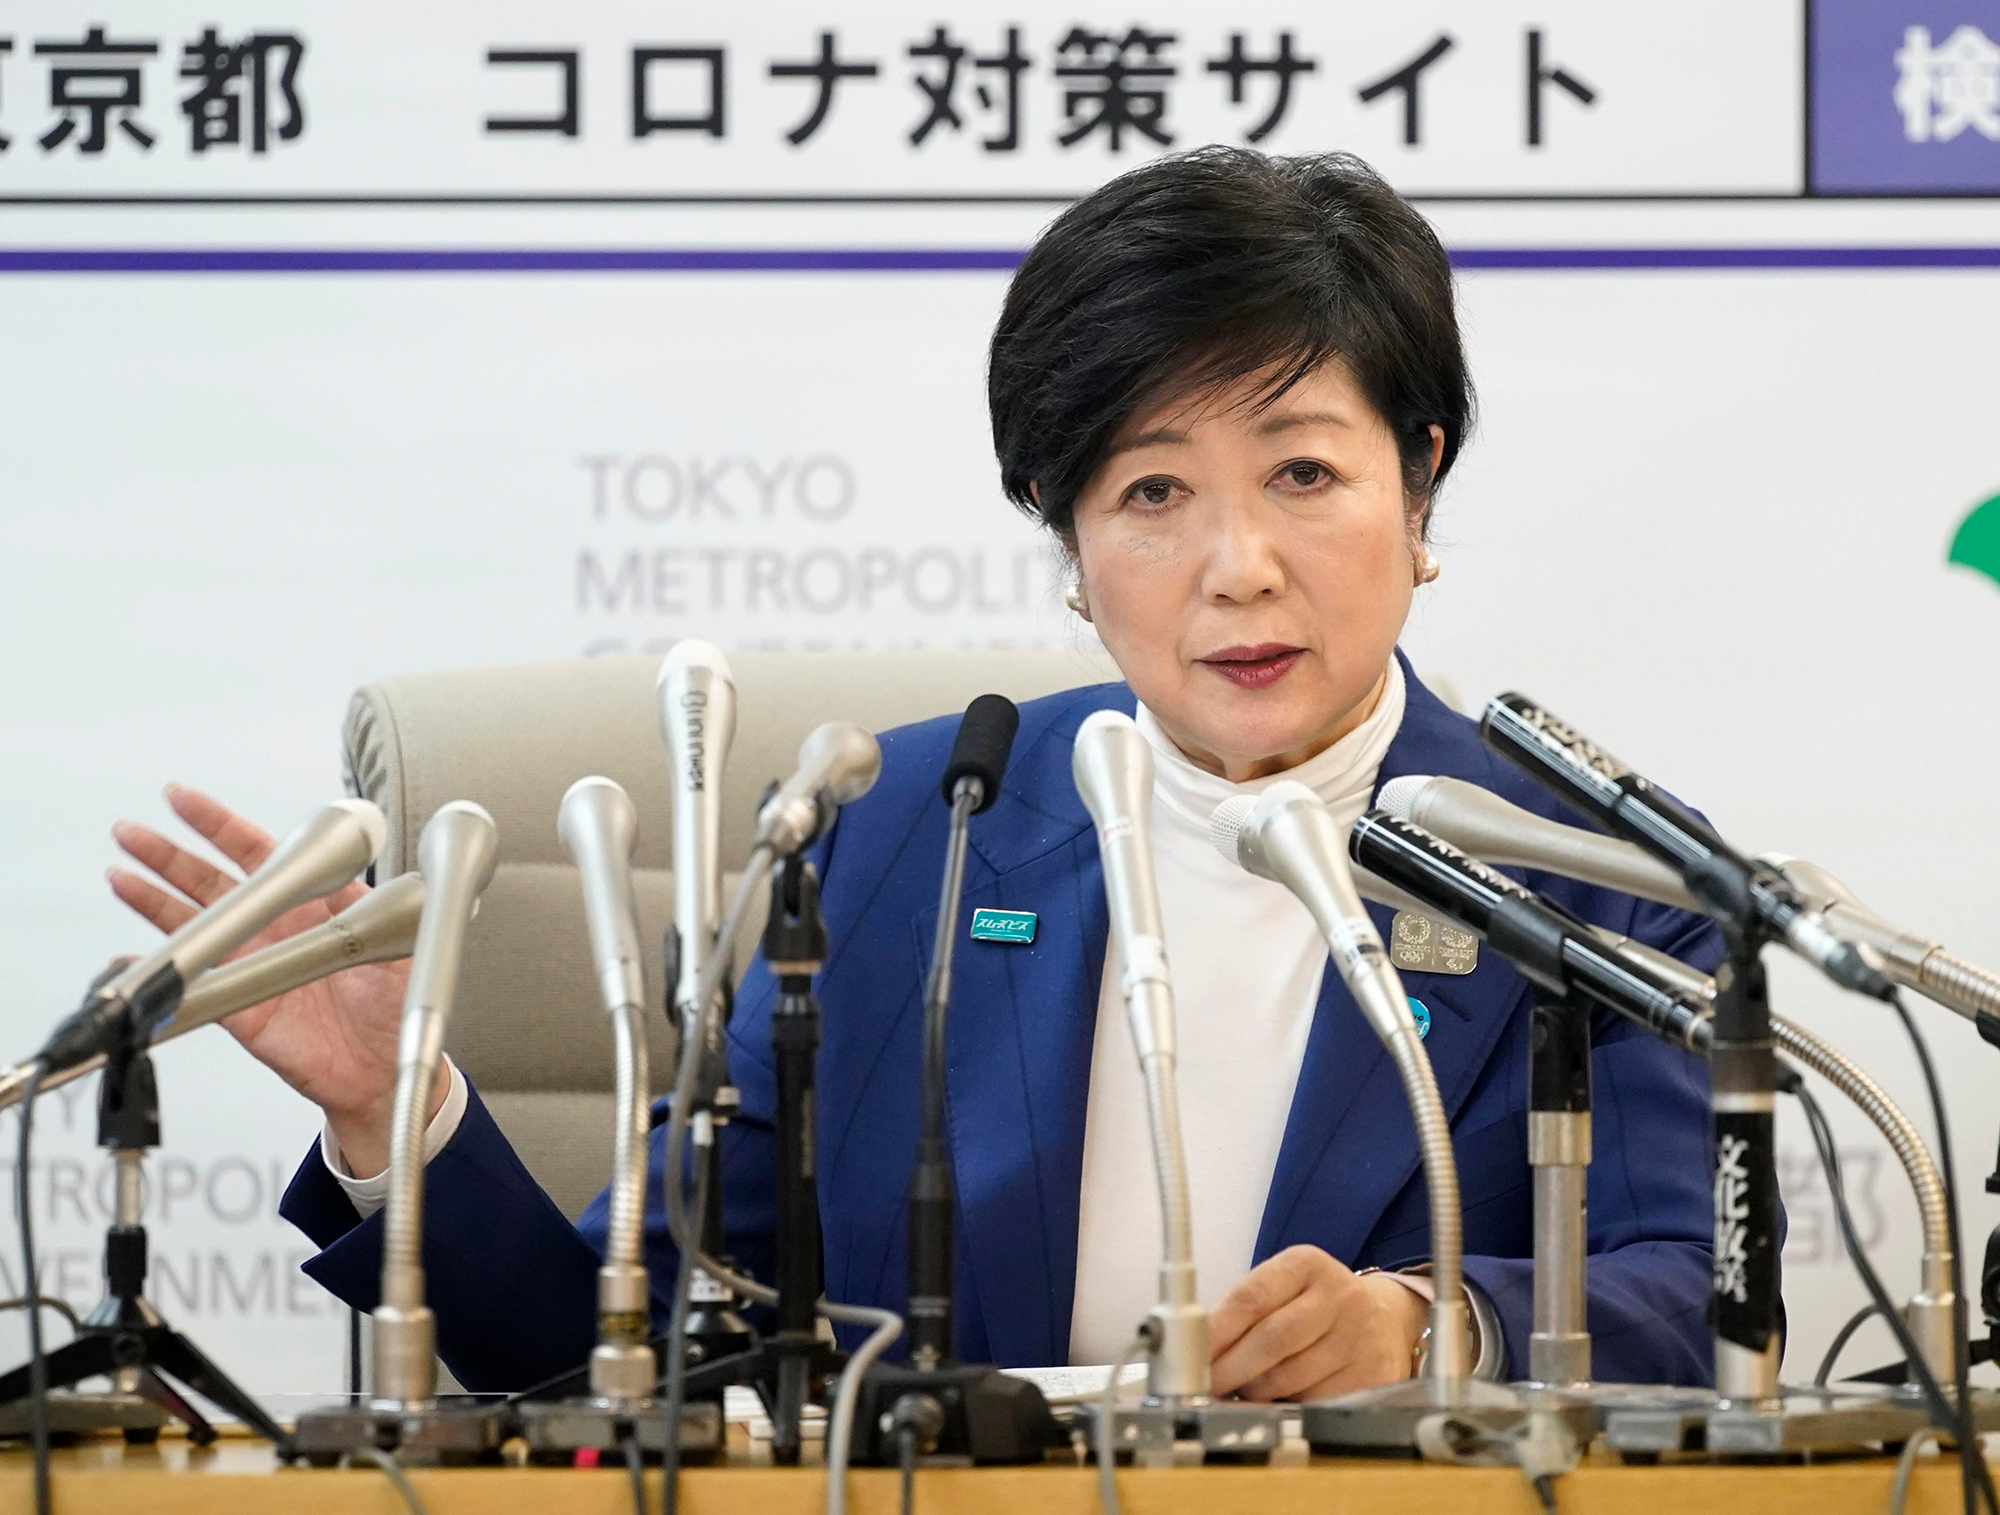 Tokyo Gov. Yuriko Koike attends a news conference in Tokyo on March 30, 2020, amid the spread of new coronavirus infections.